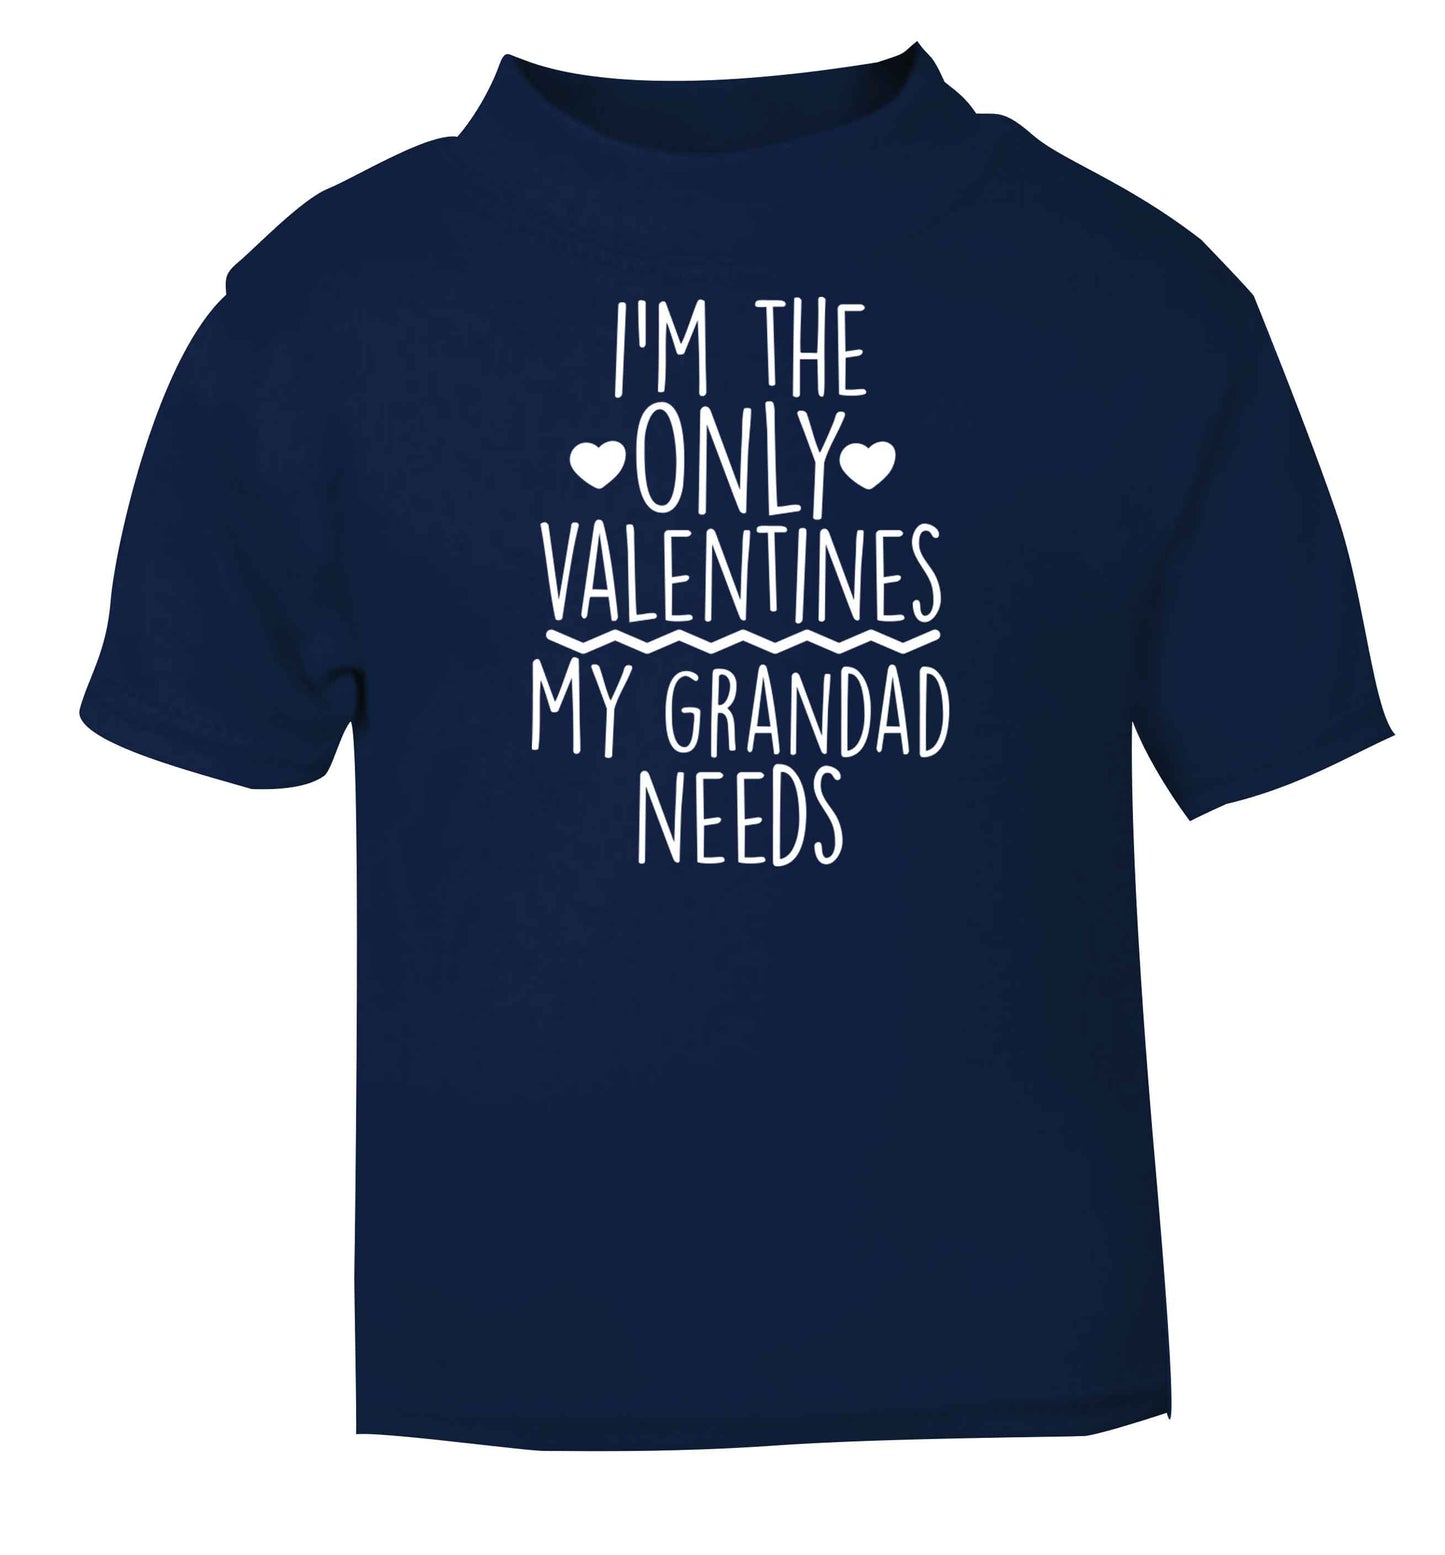 I'm the only valentines my grandad needs navy baby toddler Tshirt 2 Years